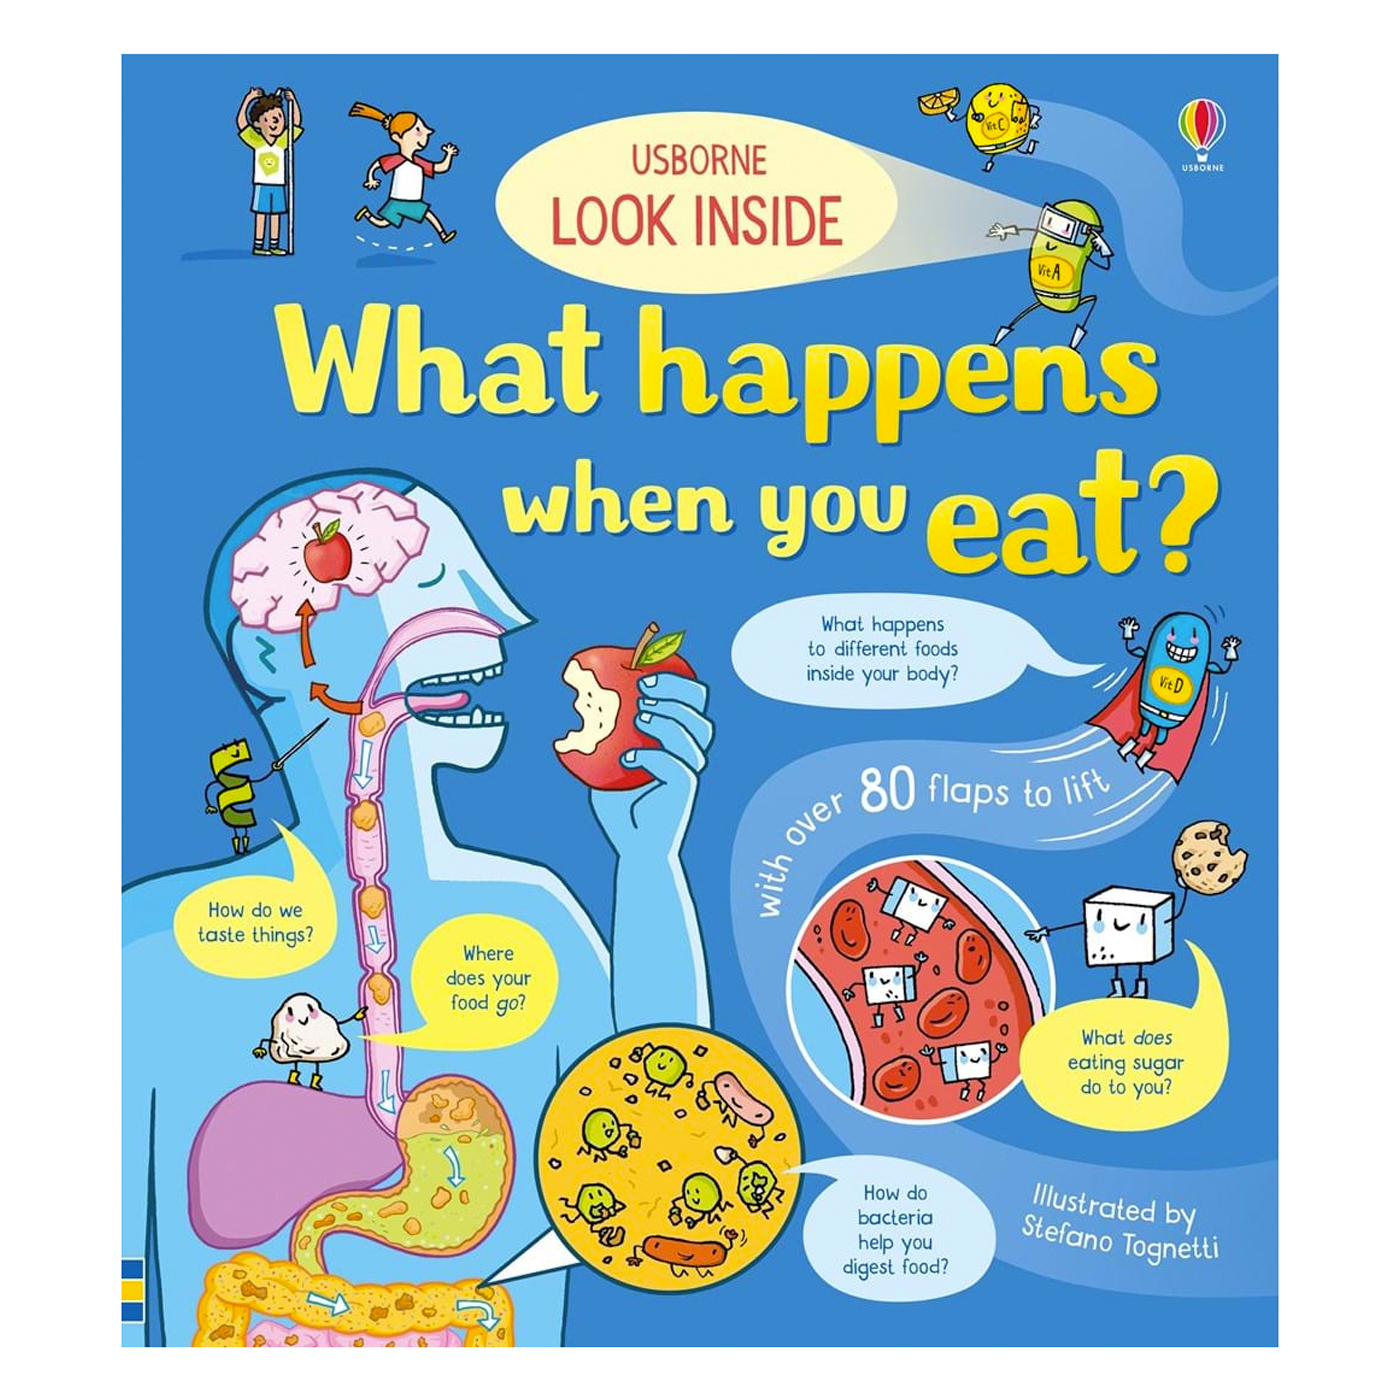 USBORNE Look Inside: What happens when you eat?